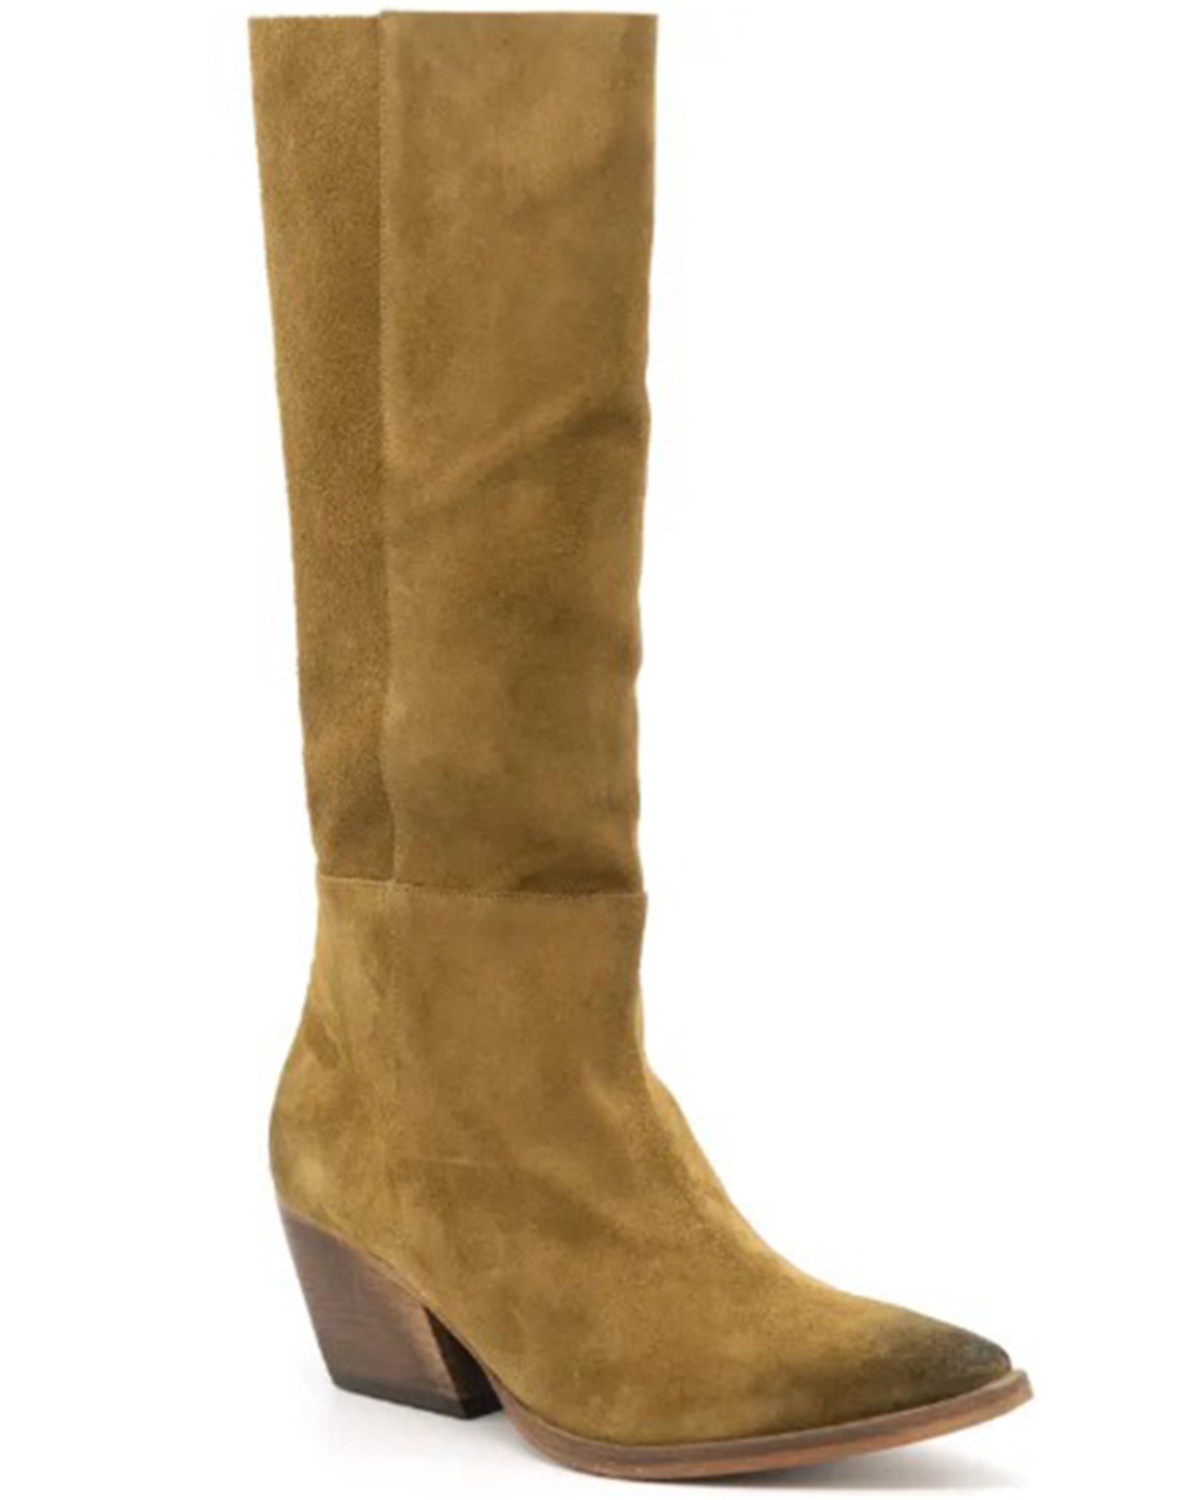 Golo Shoes Women's Brandy West Western Boots - Pointed Toe